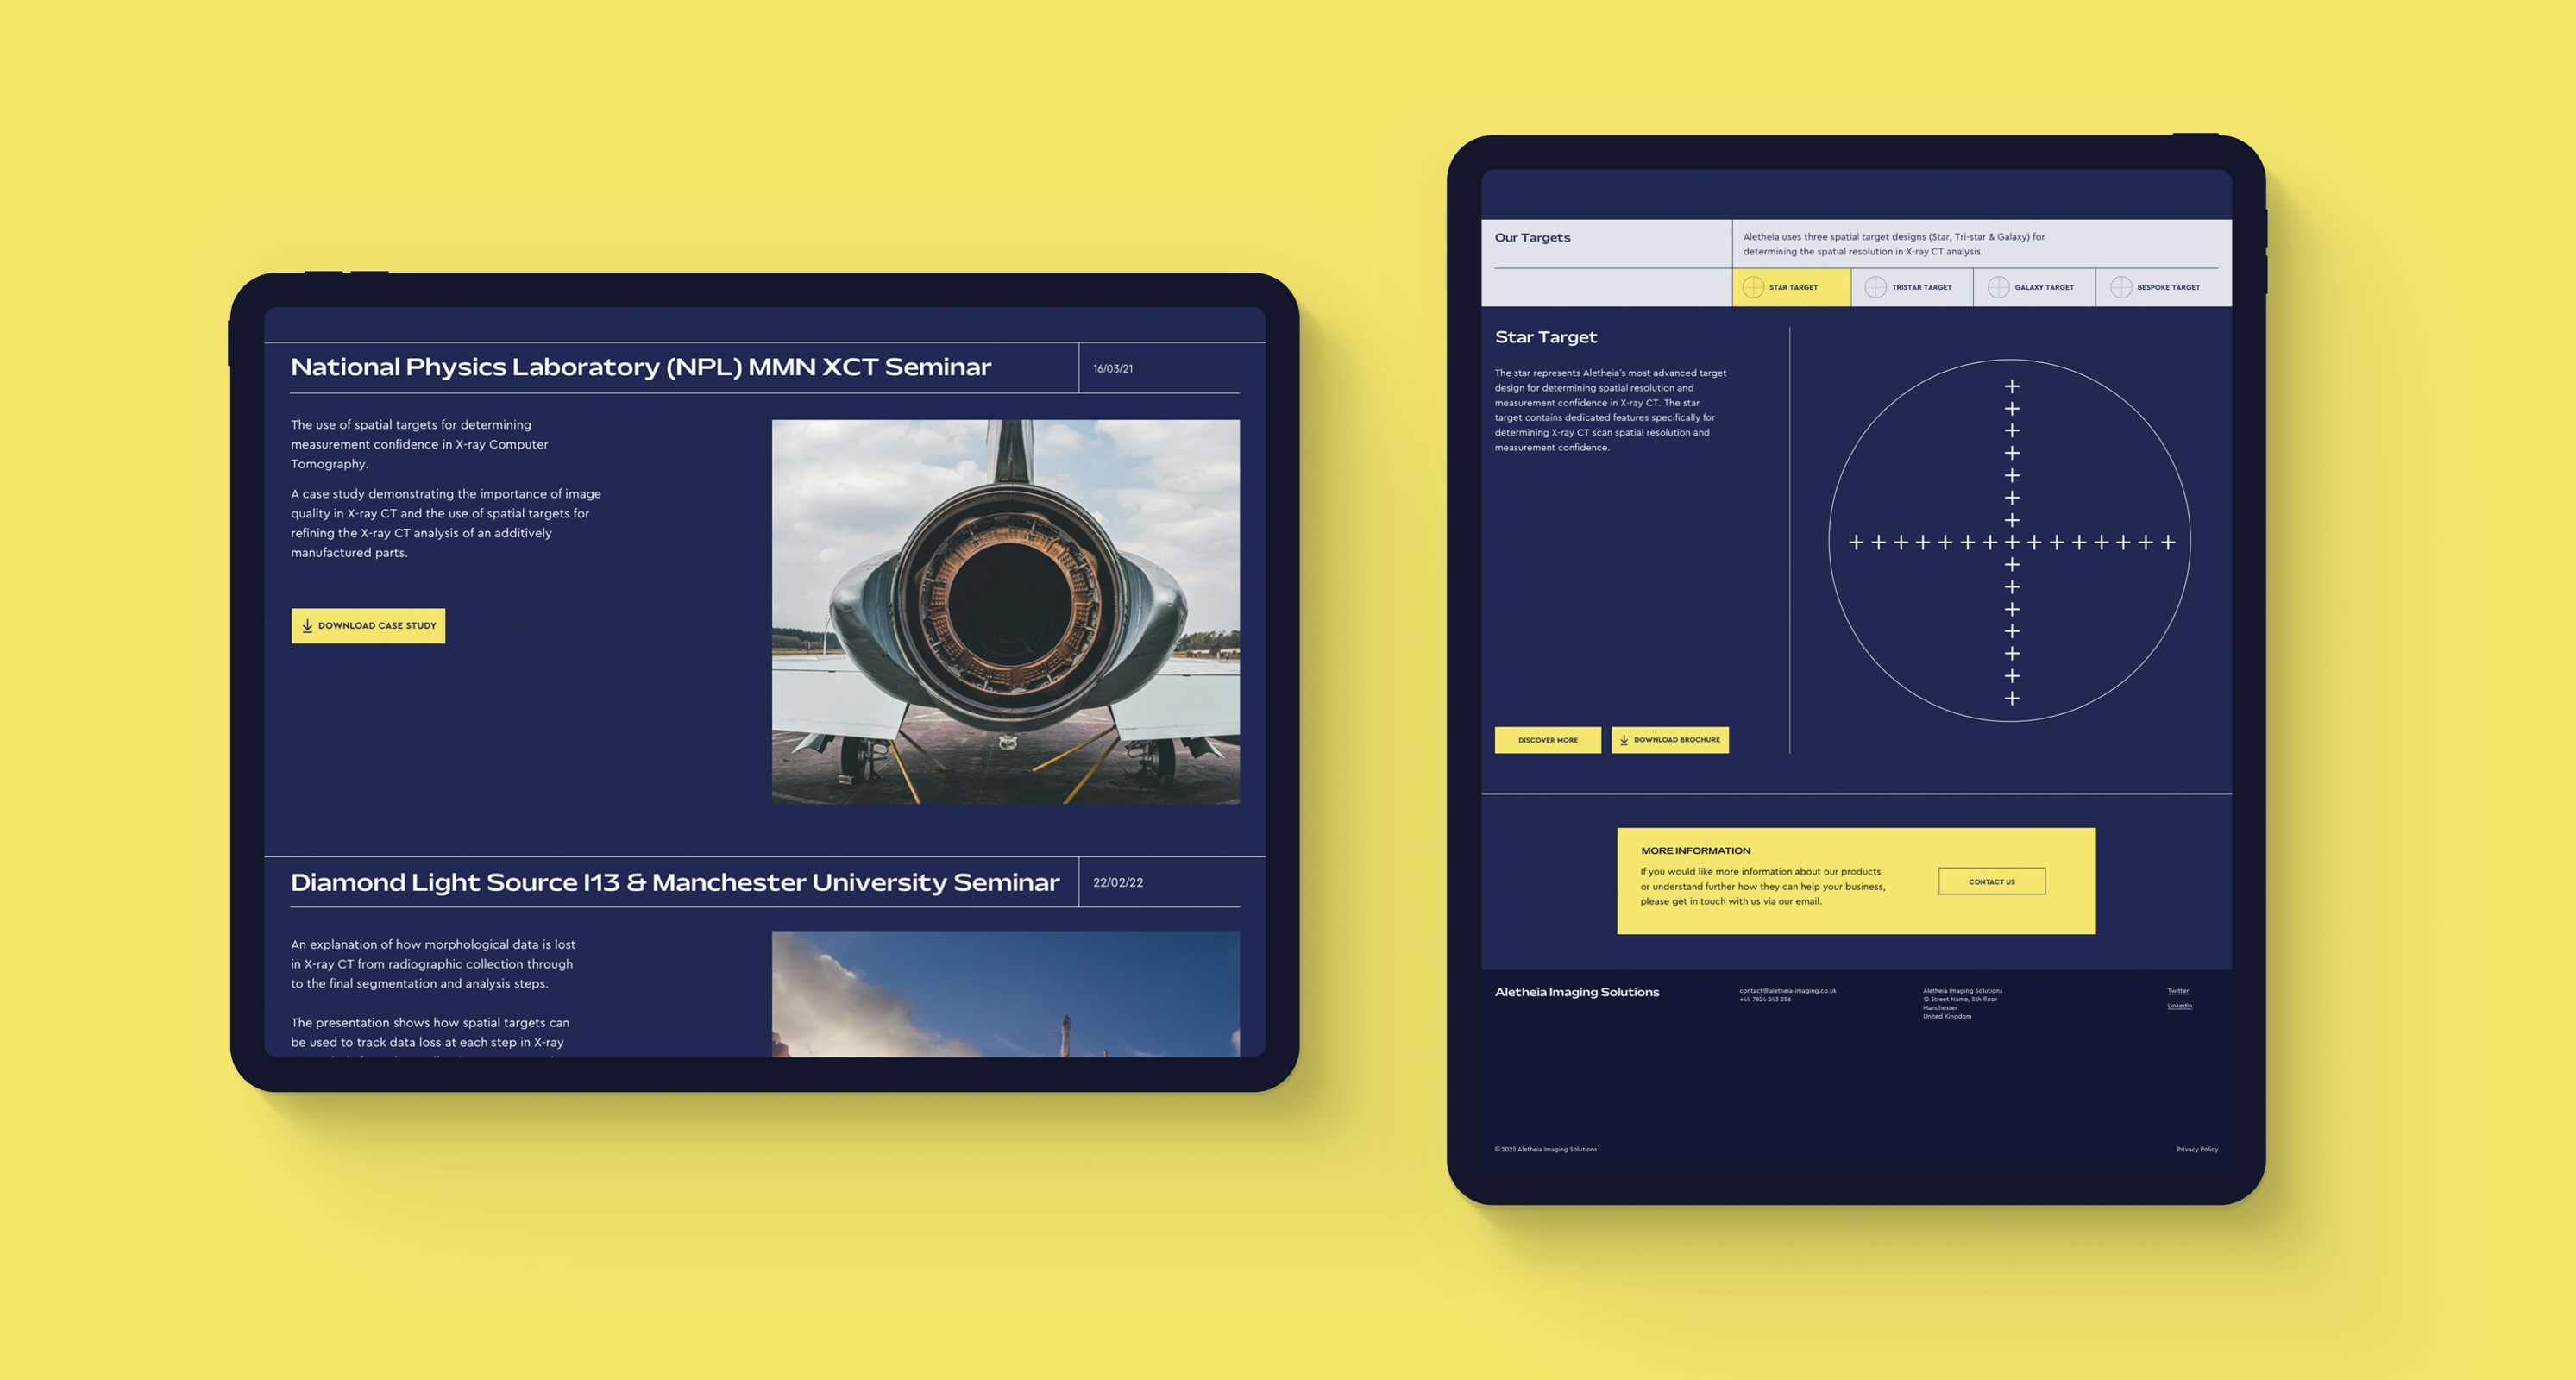 To tablets sits side-by-side on a yellow background. The tablet on the left hand side is in landscape for a landing page advertising a “National Physics Laboratory (NPL) MMN XCT Seminar” and a “Diamond Light Source 113 & Manchester University seminar” The tablet on the right hand side is in portrait mode and is explaining a Star Target and has a circle on it with a cross made of smaller crosses inside it.